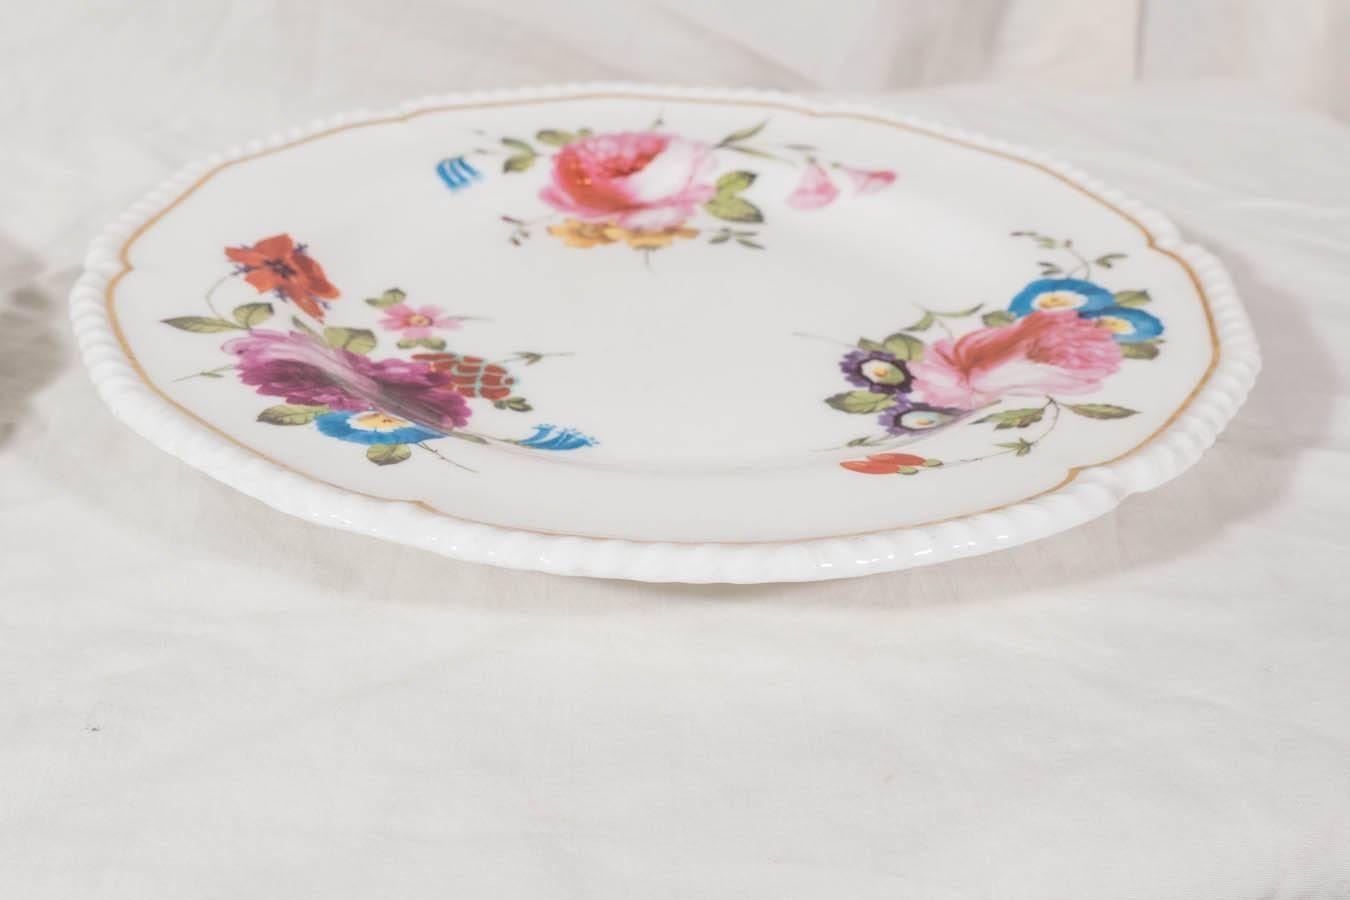 Antique Porcelain Dishes Each Hand-Painted with Roses on White Porcelain 4